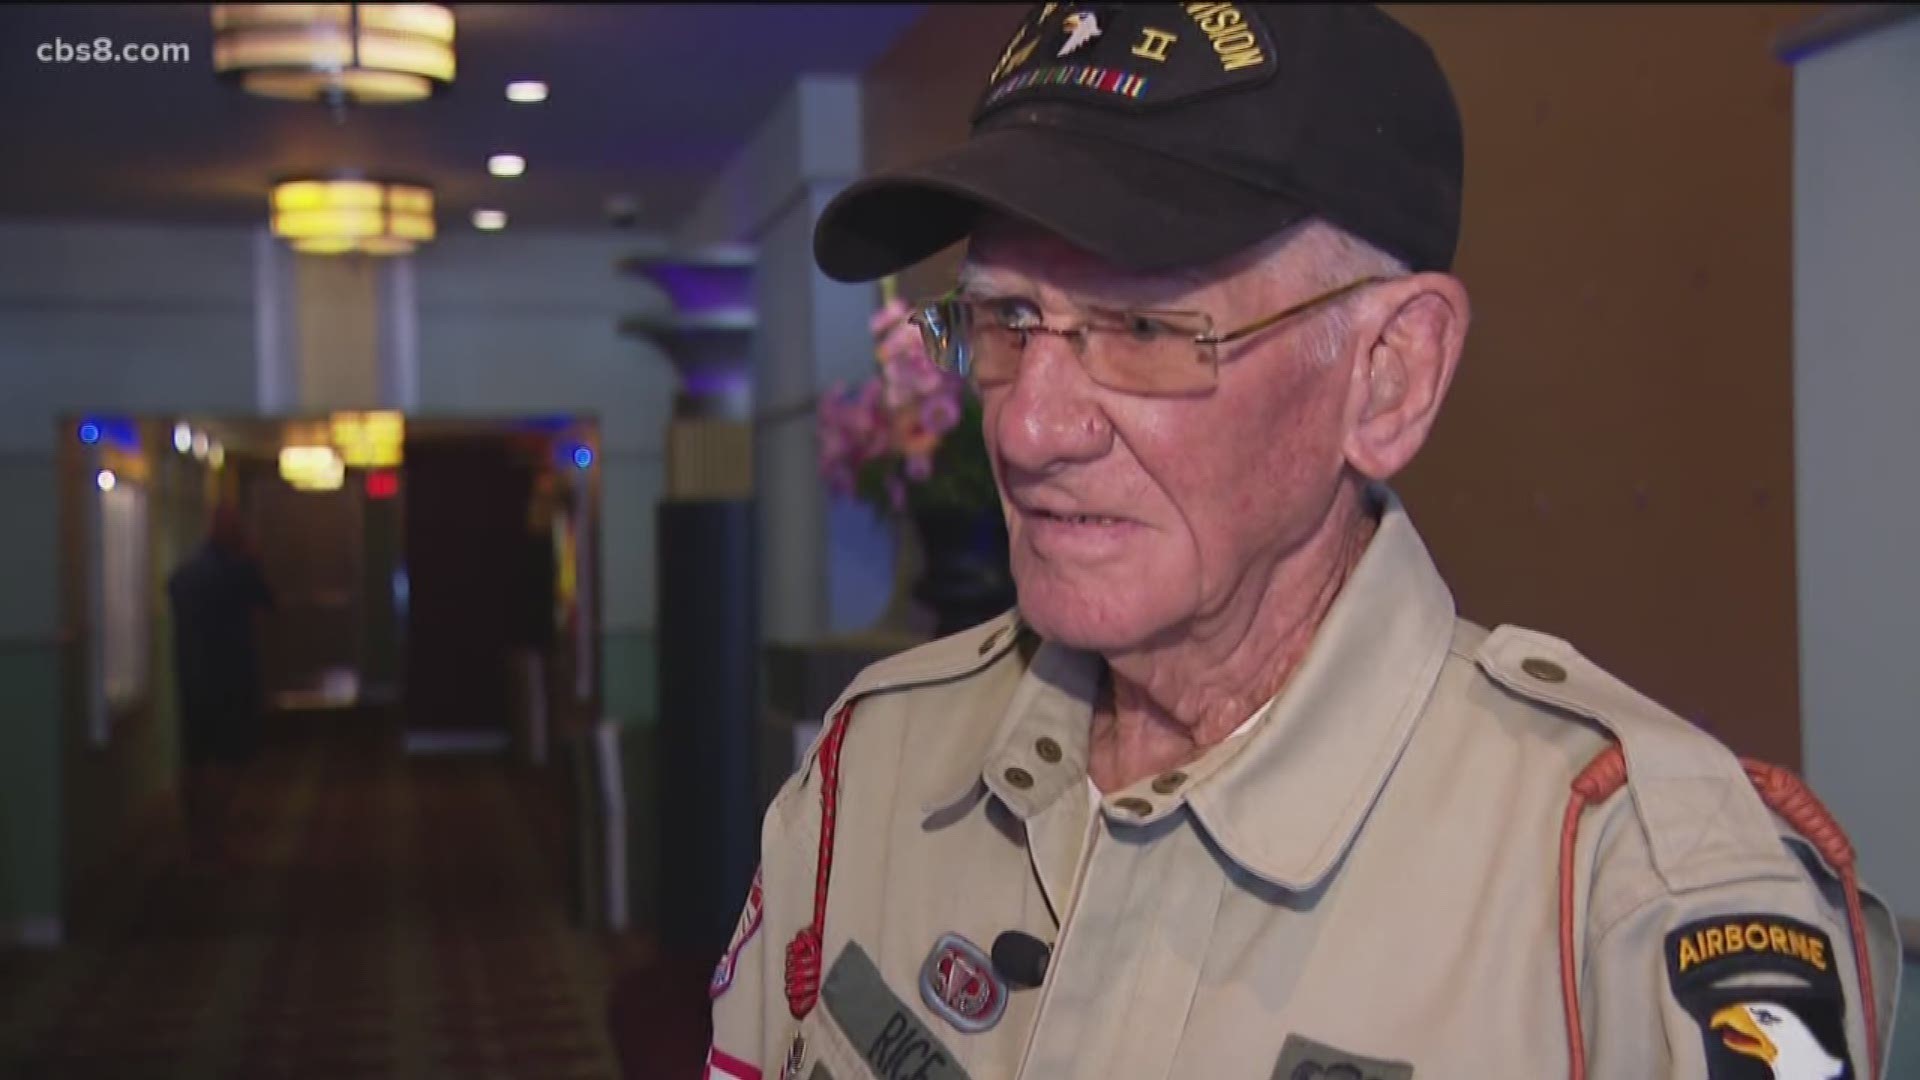 The 'Normandy Jump 2019' documentary will premier at the Coronado Village in August, but it more than documents a D-Day hero’s jump at the age of 97. The film will also help pay tribute to so many World War II veterans on a flight of a lifetime.